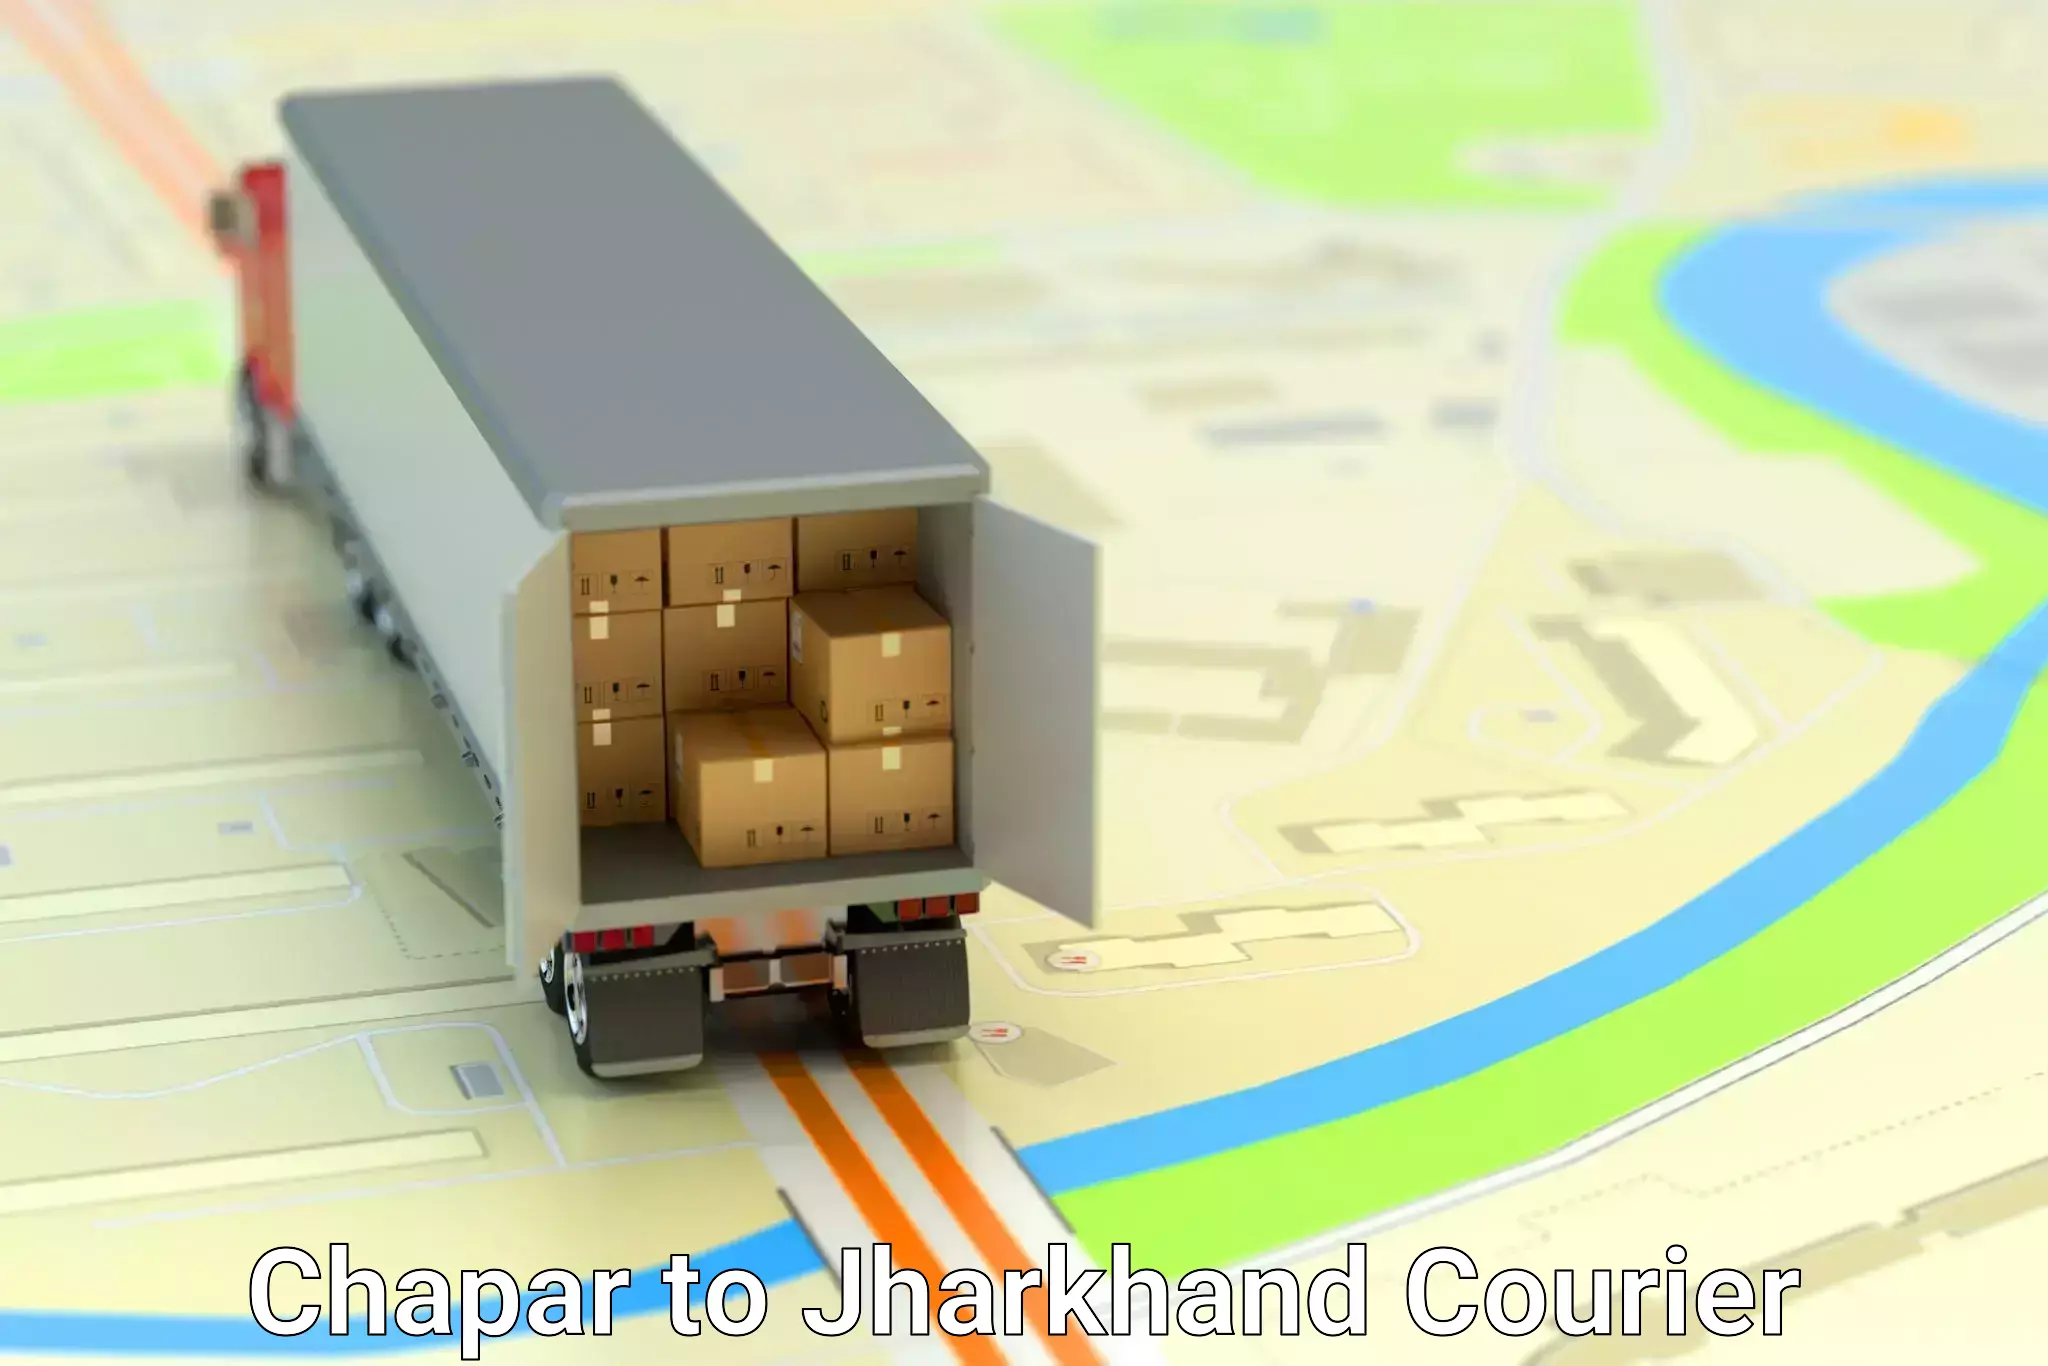 Enhanced tracking features in Chapar to Jharkhand